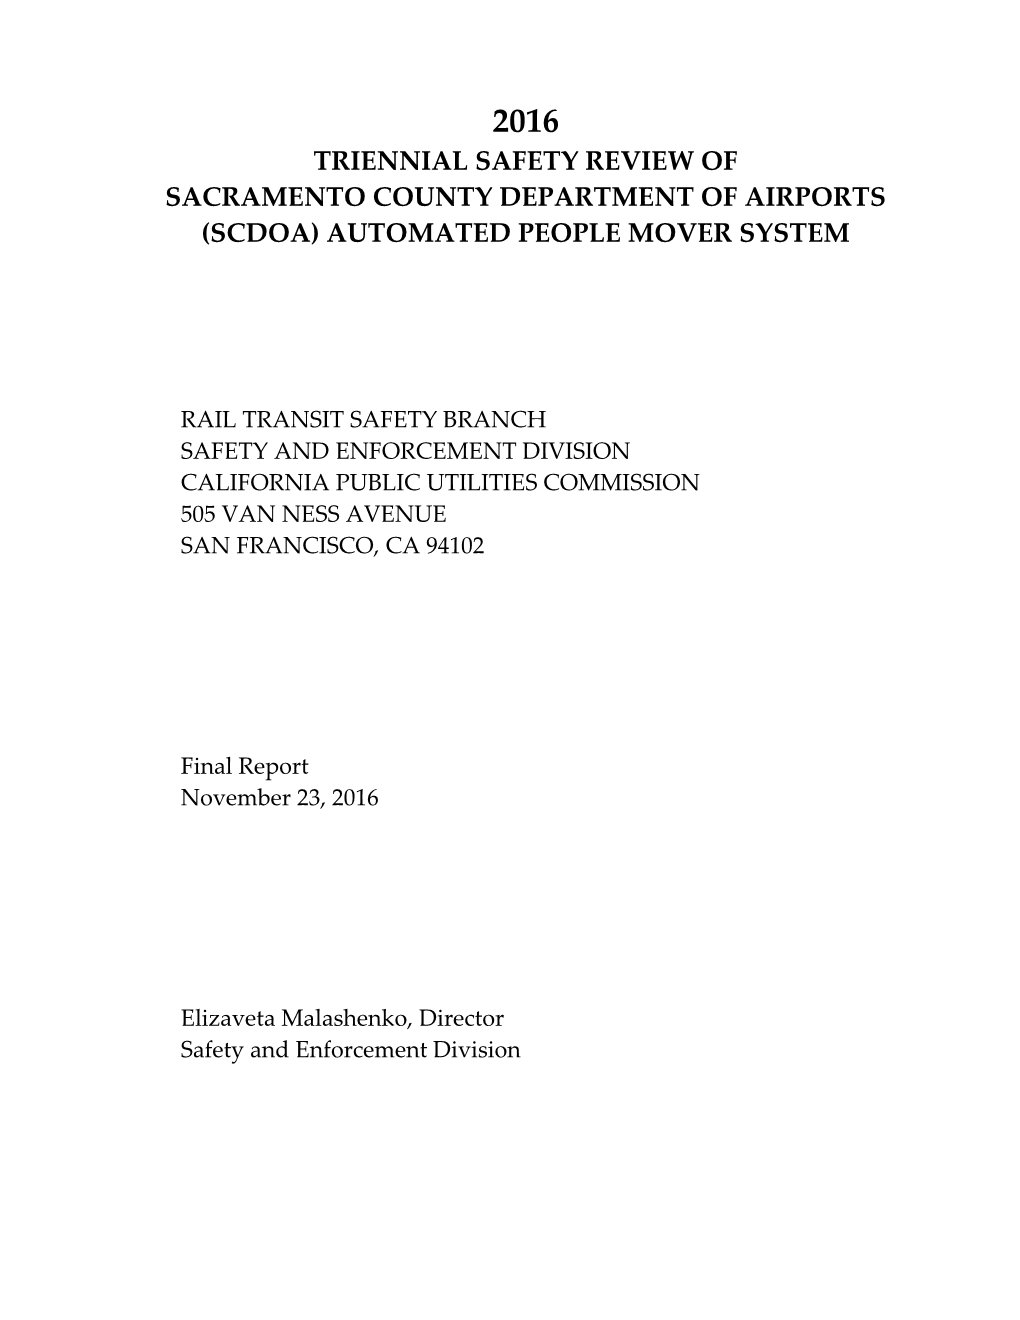 Sacramento County Department of Airports(Scdoa) Automated People Mover System